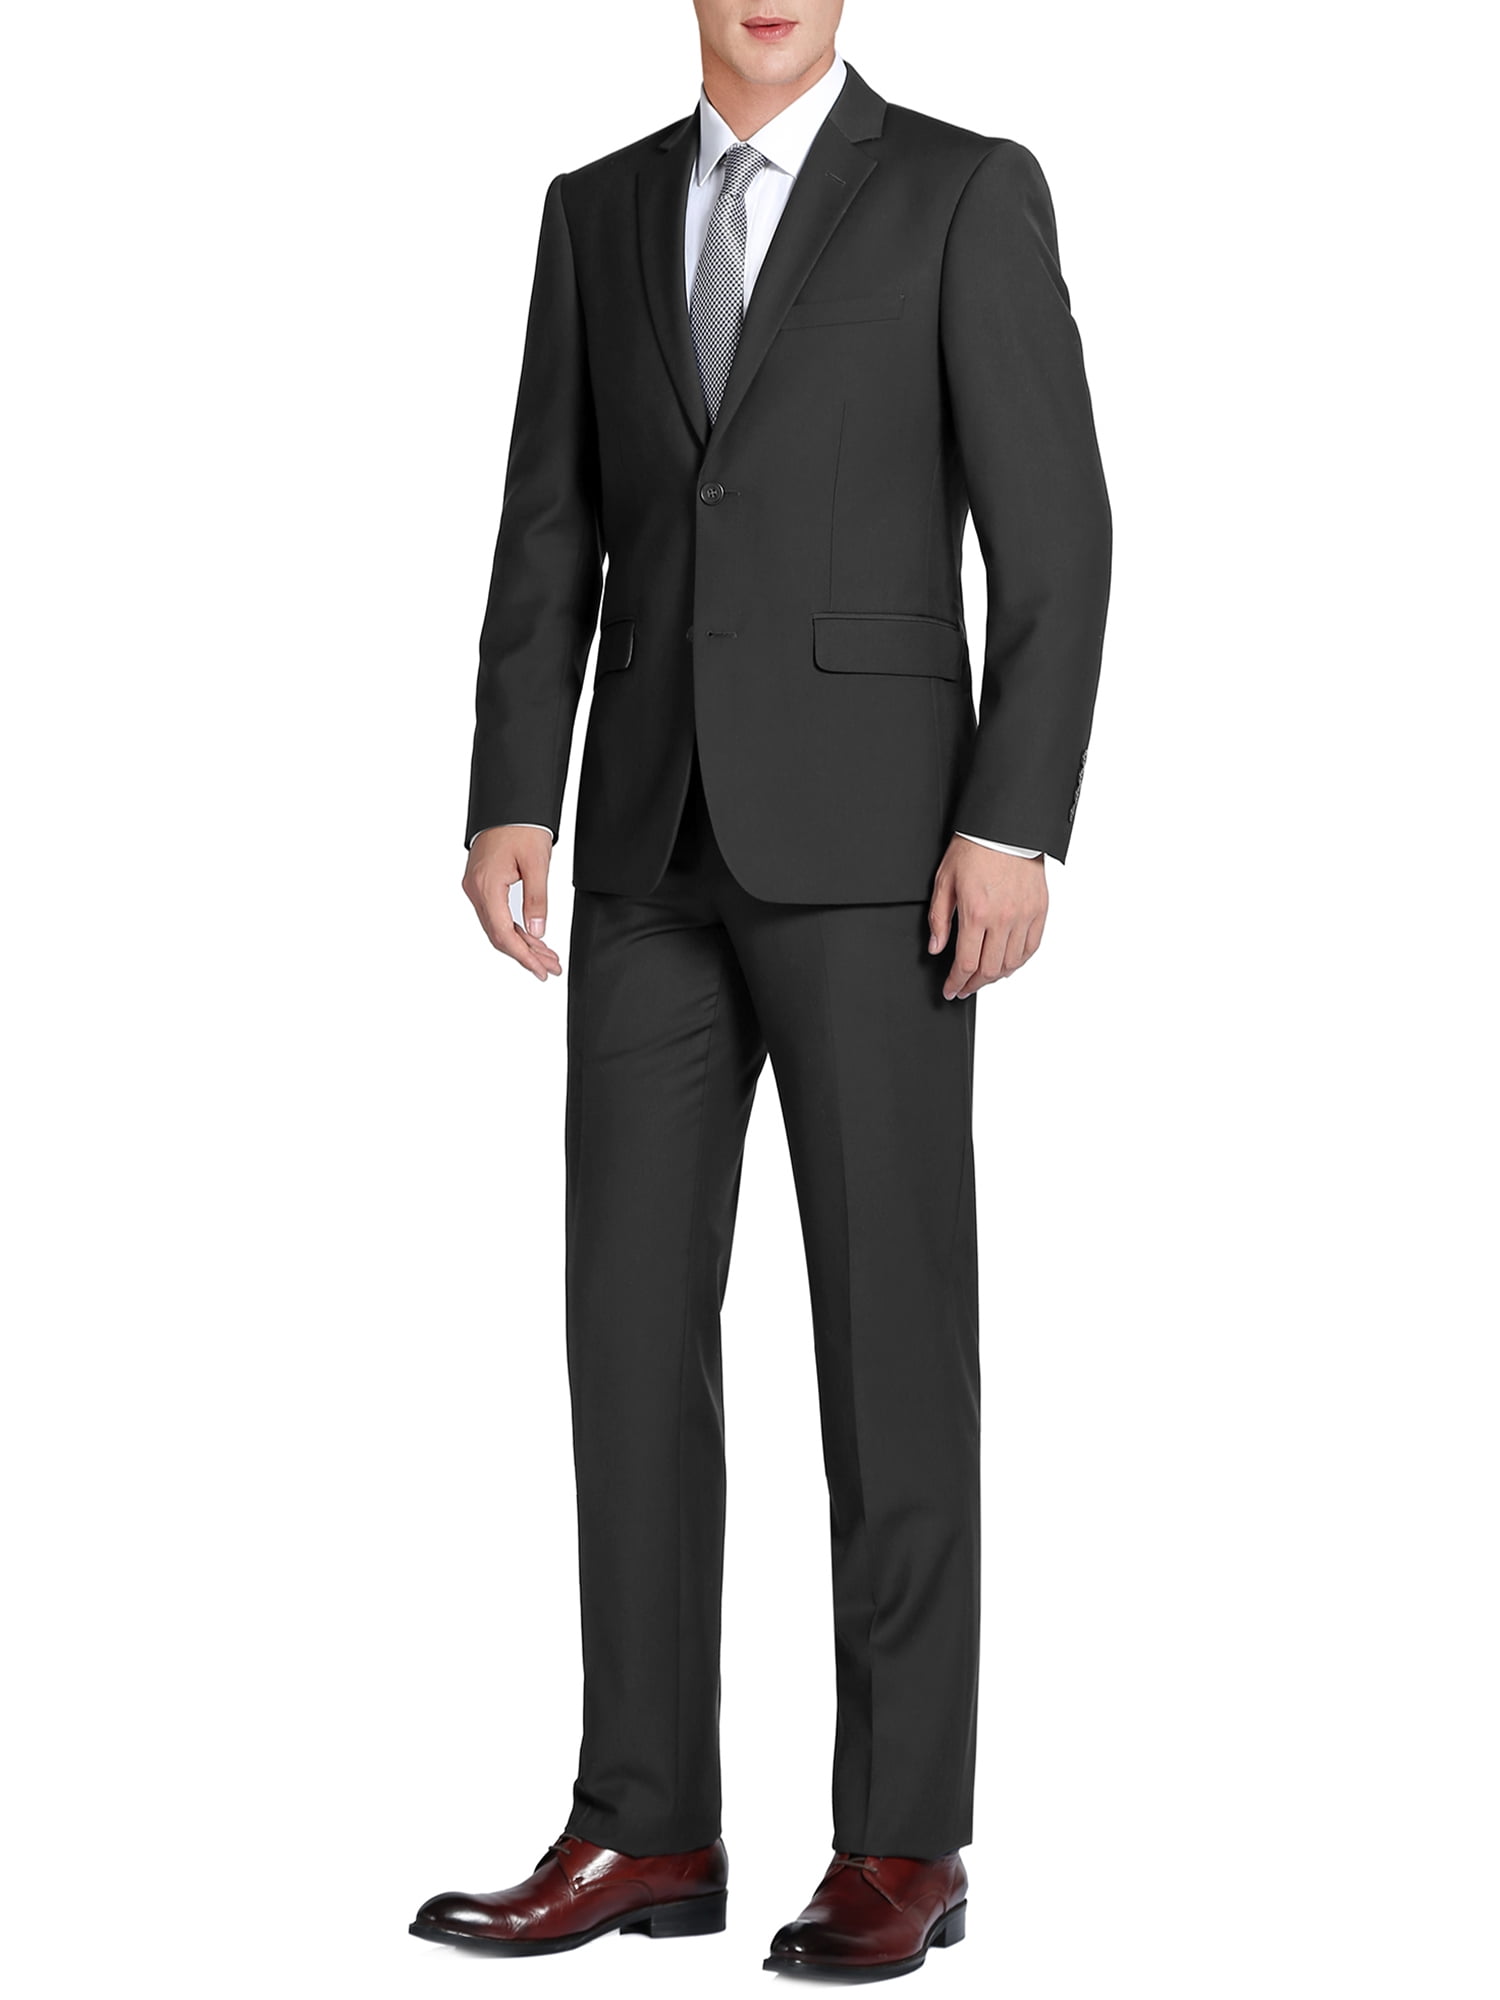 Mens 3 Piece Suit in Grey Classic Smart Formal Blazer Jacket Trouser and Waistcoat Sold as Set